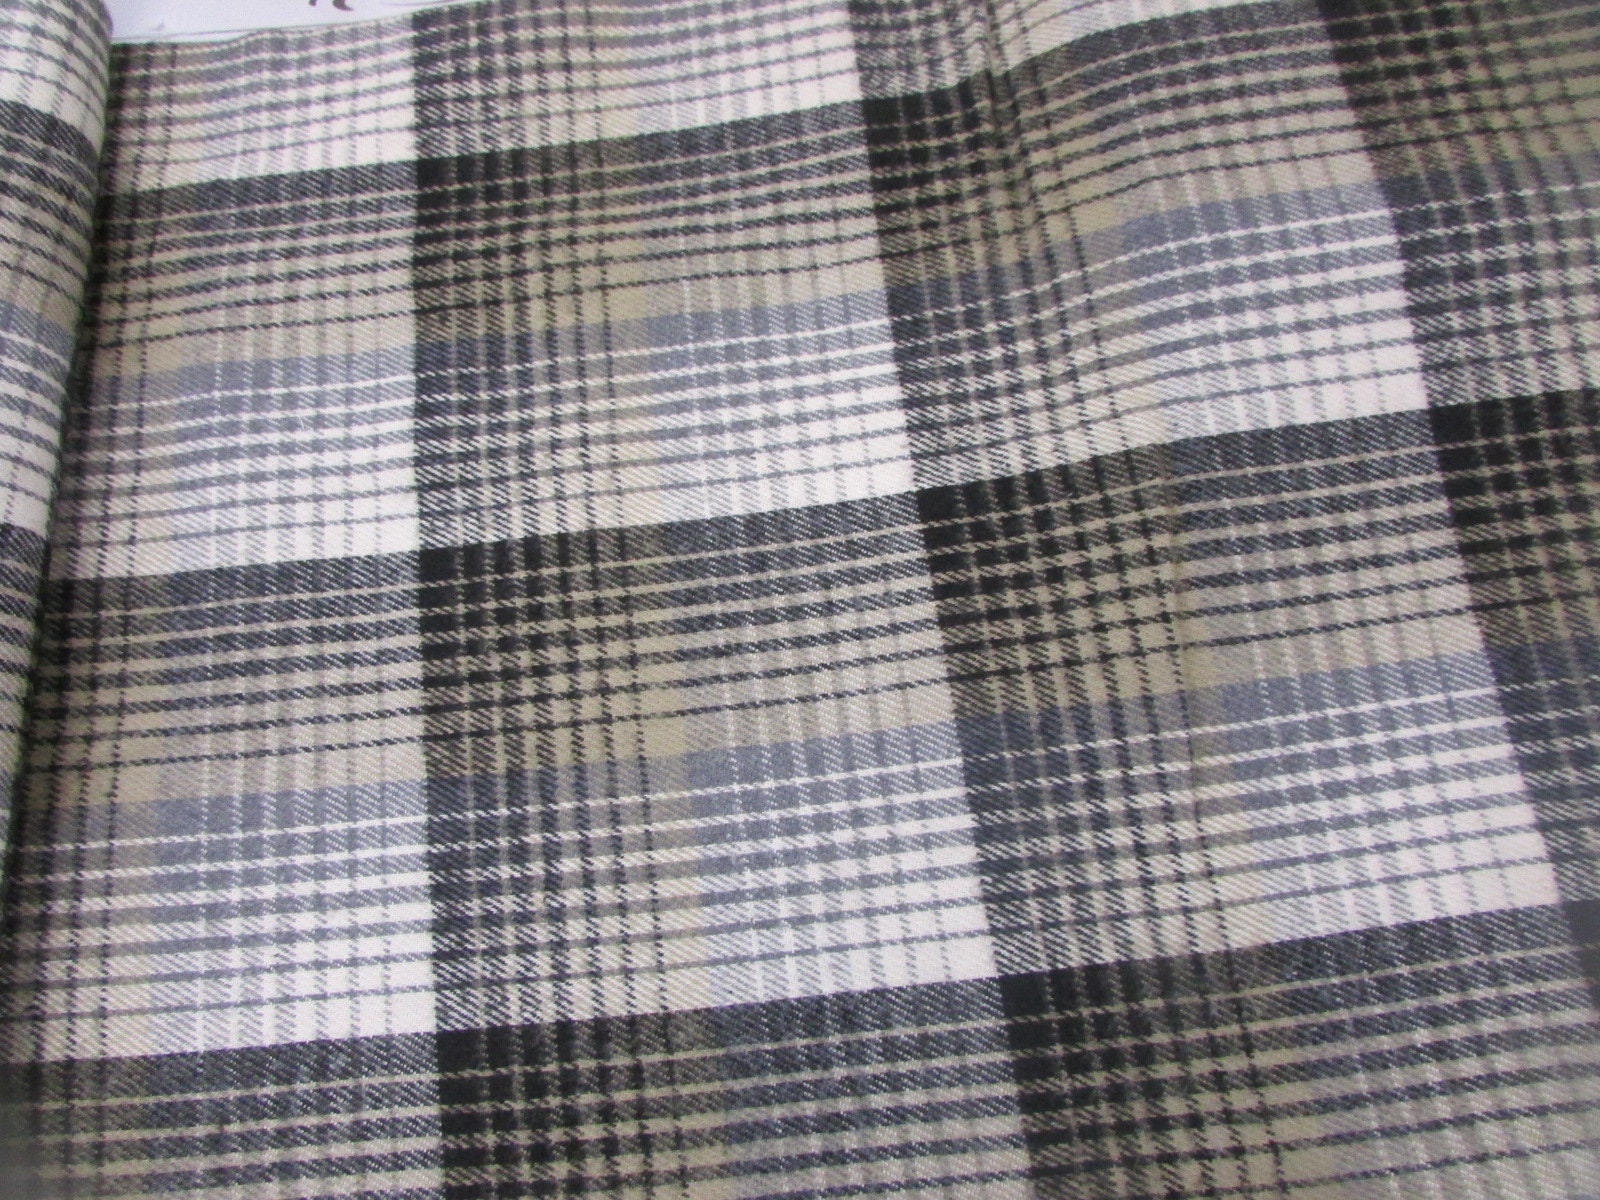 FabricLA 100% Cotton Flannel Fabric - 58/60 inch Inches (150 cm) Extra Wide Flannel Fabric - Use As Blanket, Pillowcases, Shirt, PJ, Sewing, Cloth